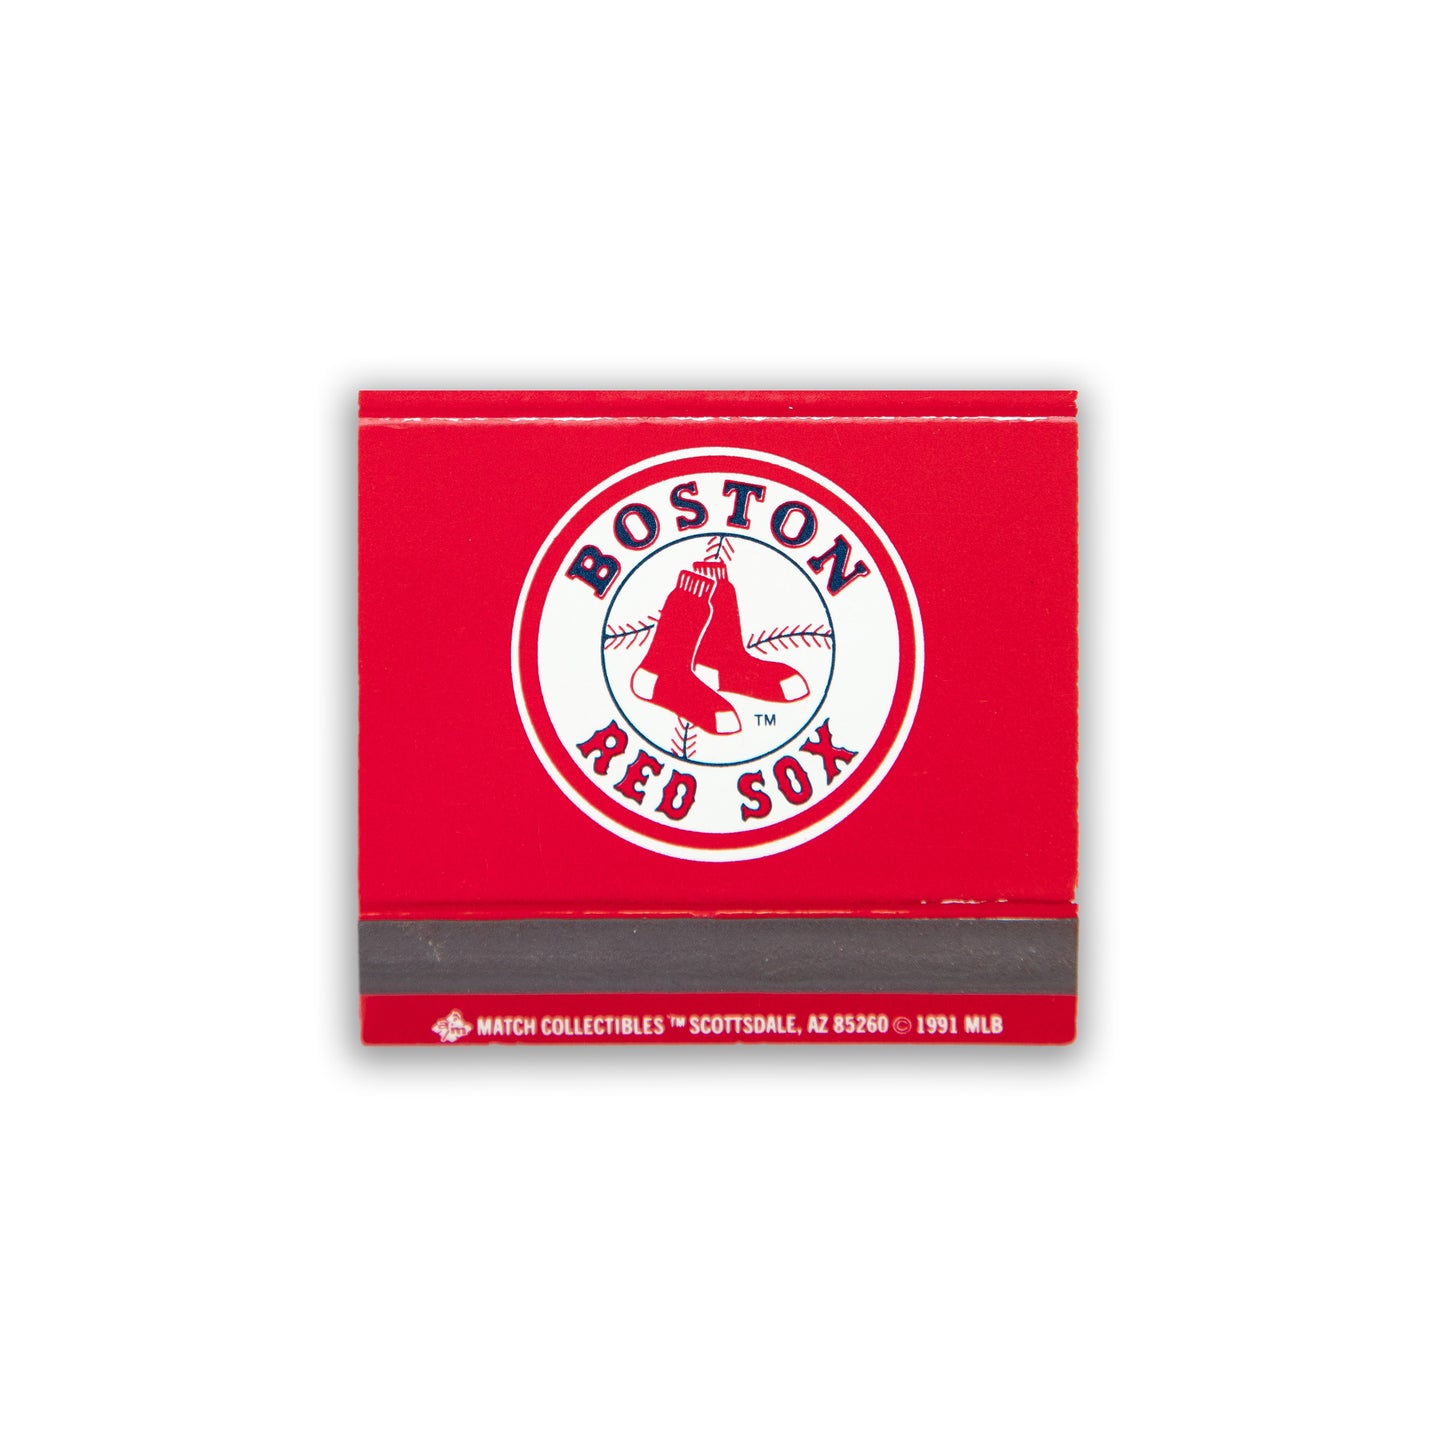 Boston Red Sox (back)